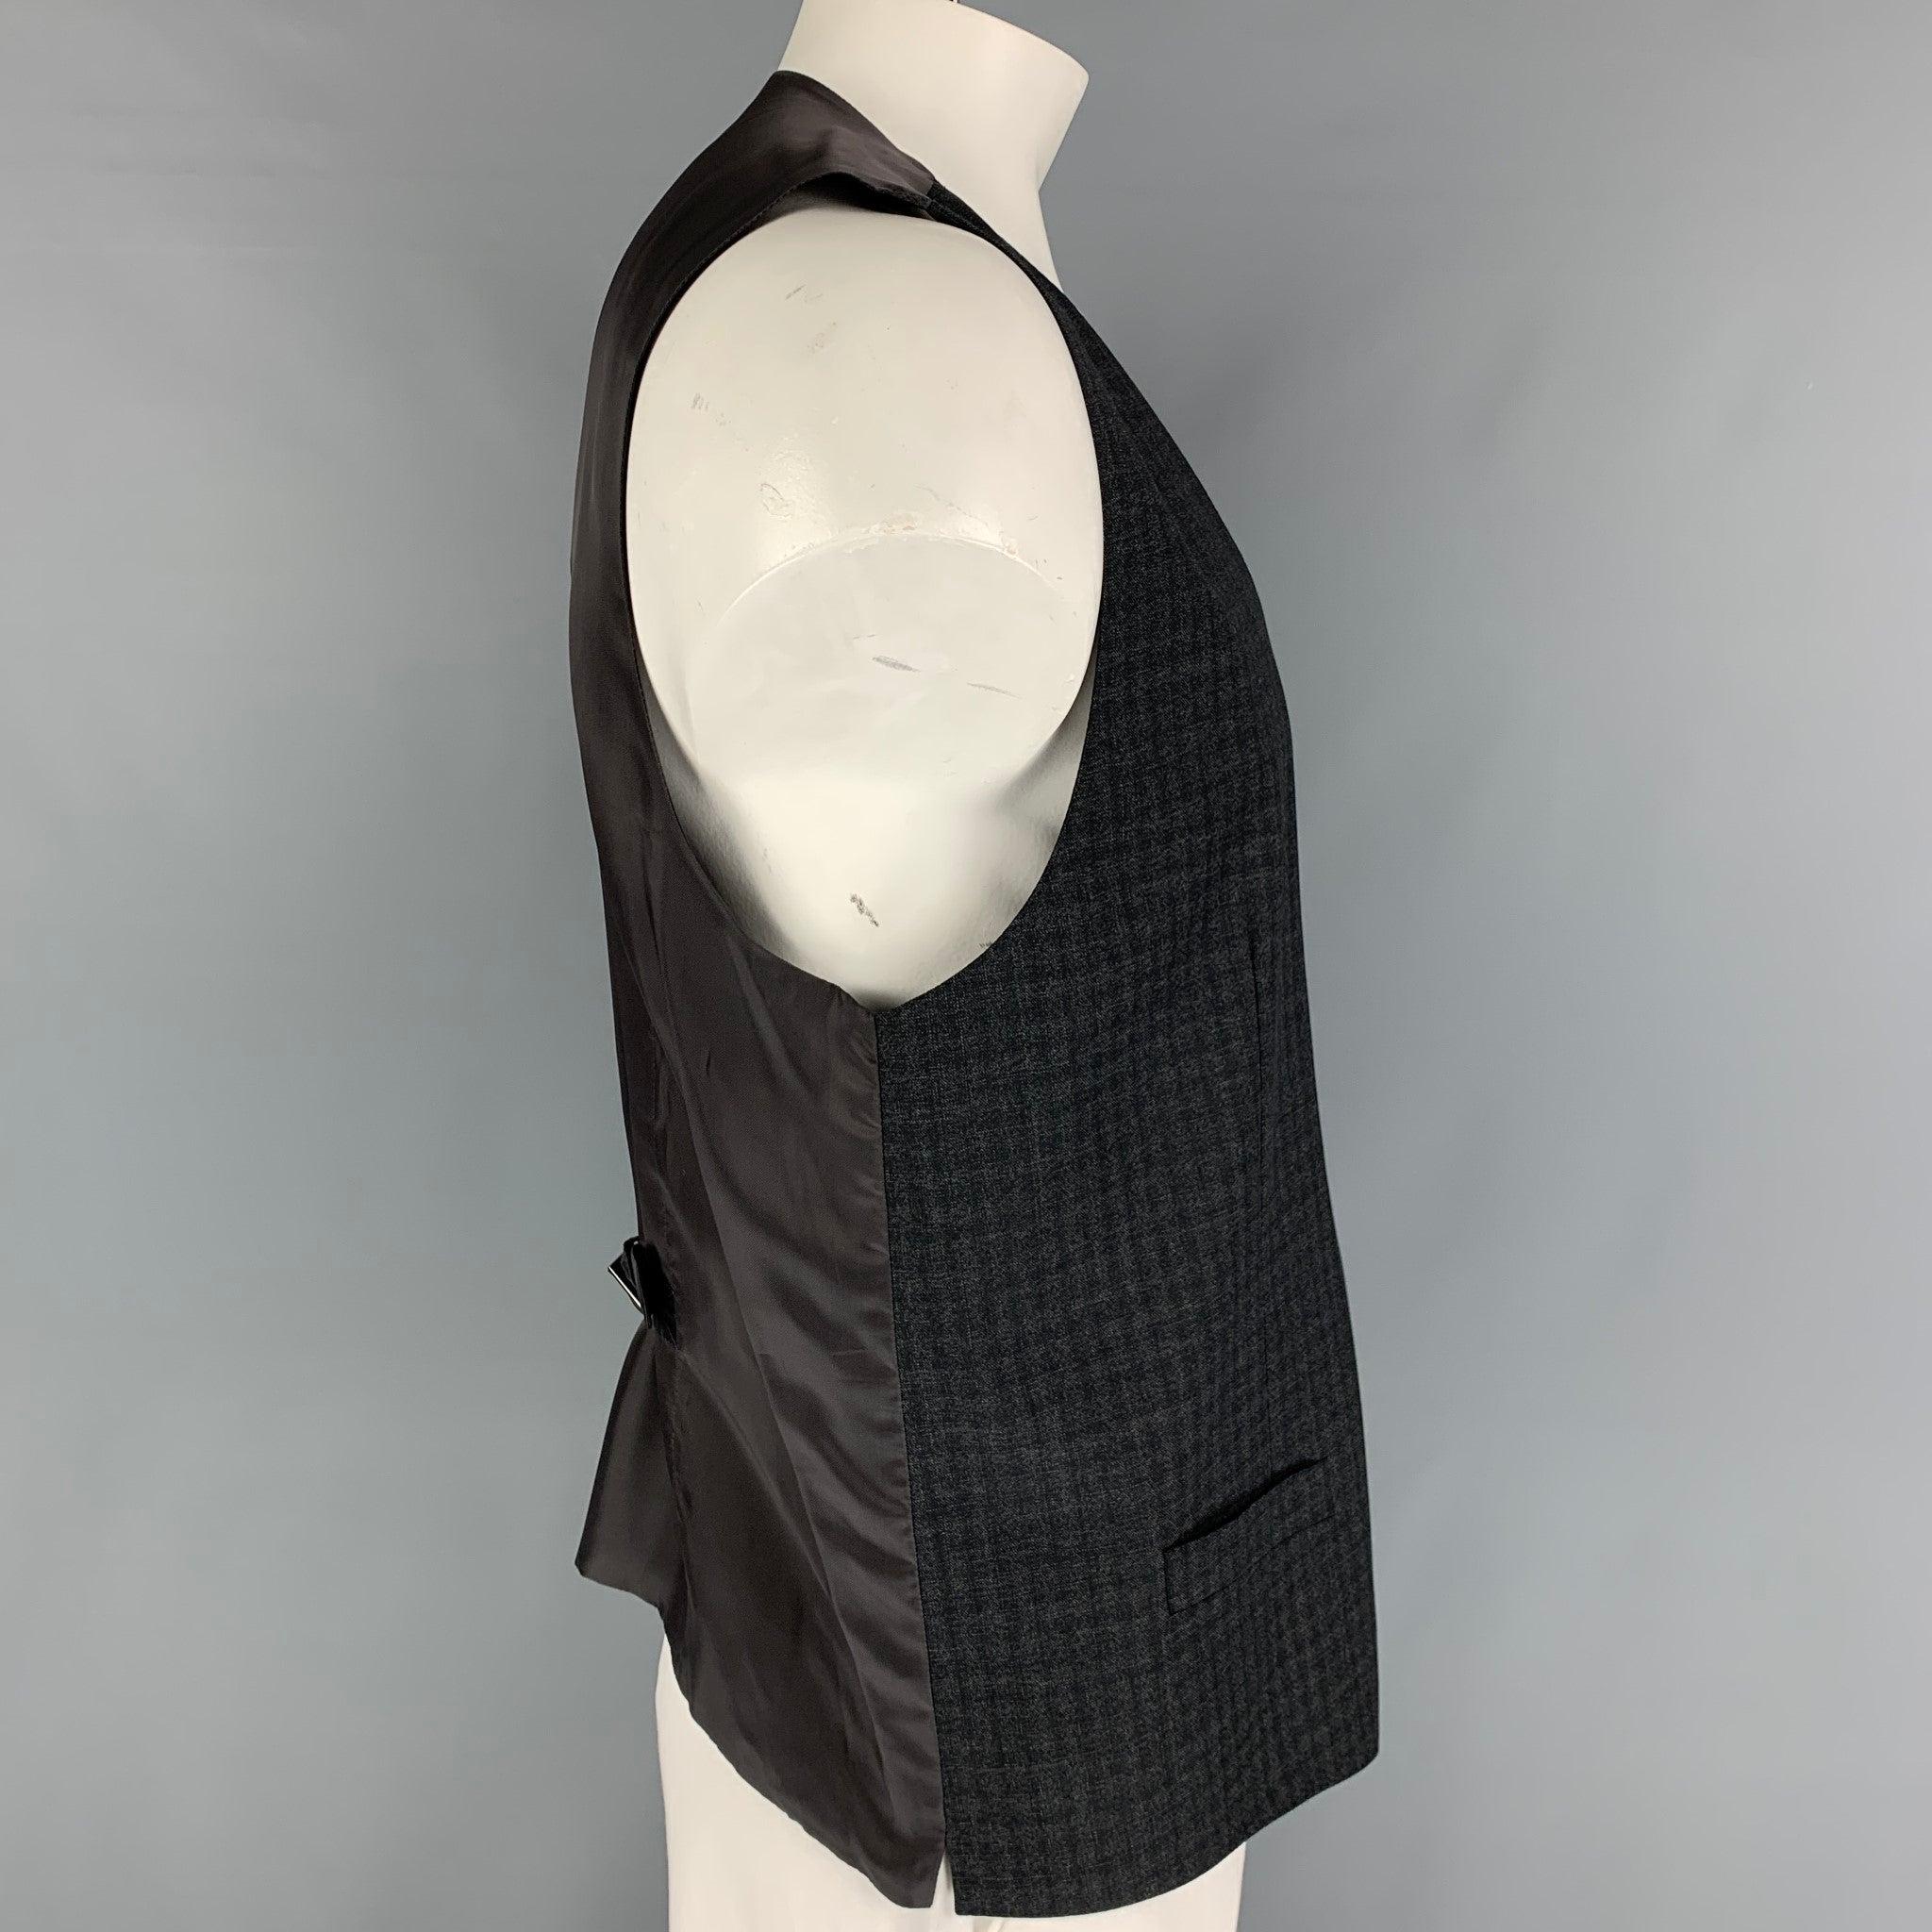 DOLCE & GABBANA
dress vest comes in a charcoal wool featuring a back belt, front pockets, and a buttoned closure.
Very Good
Pre-Owned Condition. 

Marked:   Size tag removed.  

Measurements: 
 
Shoulder: 16 inches  Chest: 44 inches  Length: 25